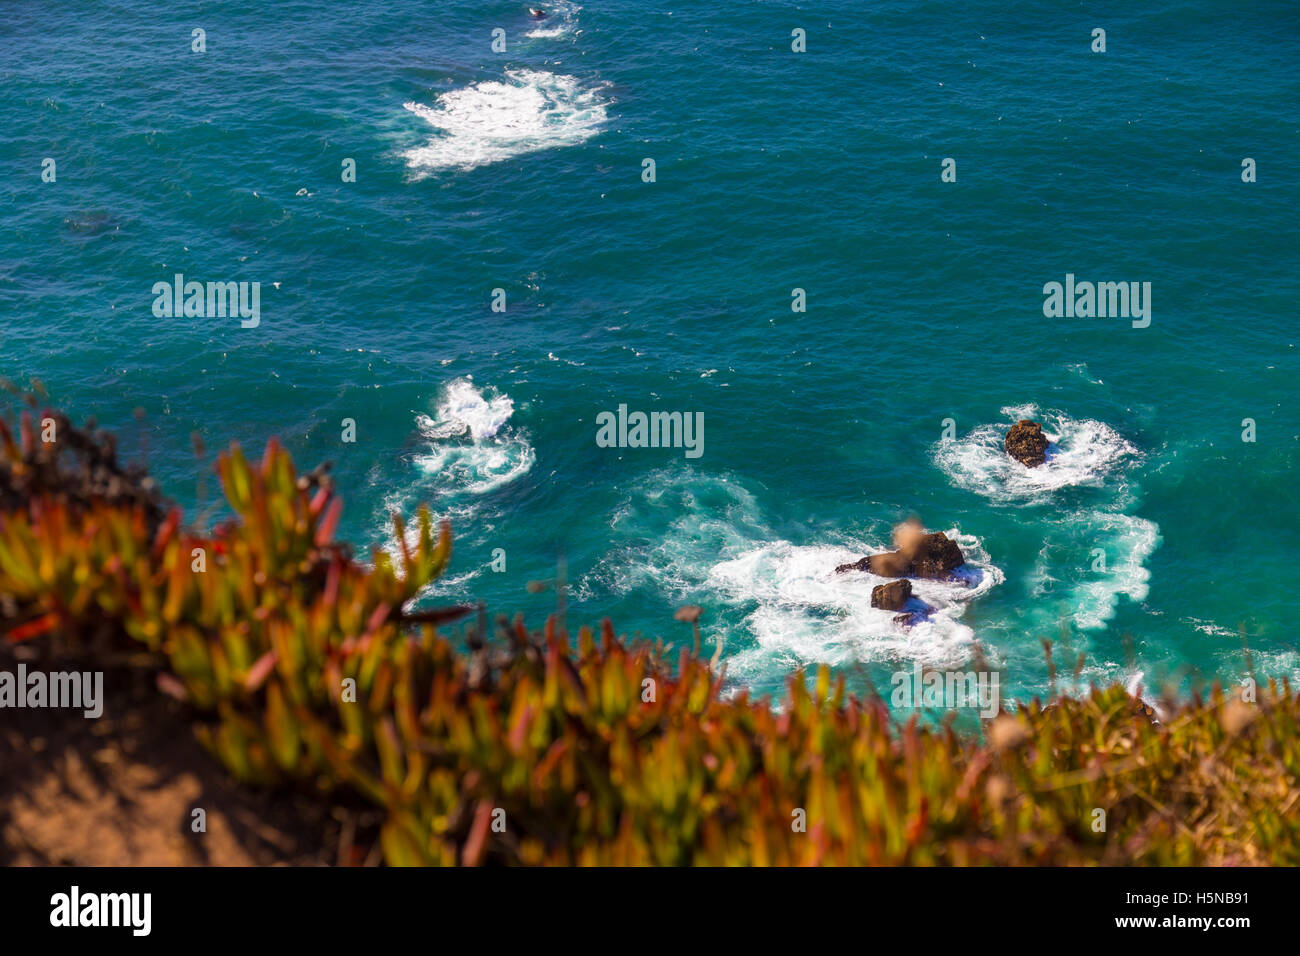 Watersplashes from waves crushing over rocks in the ocean from above Stock Photo